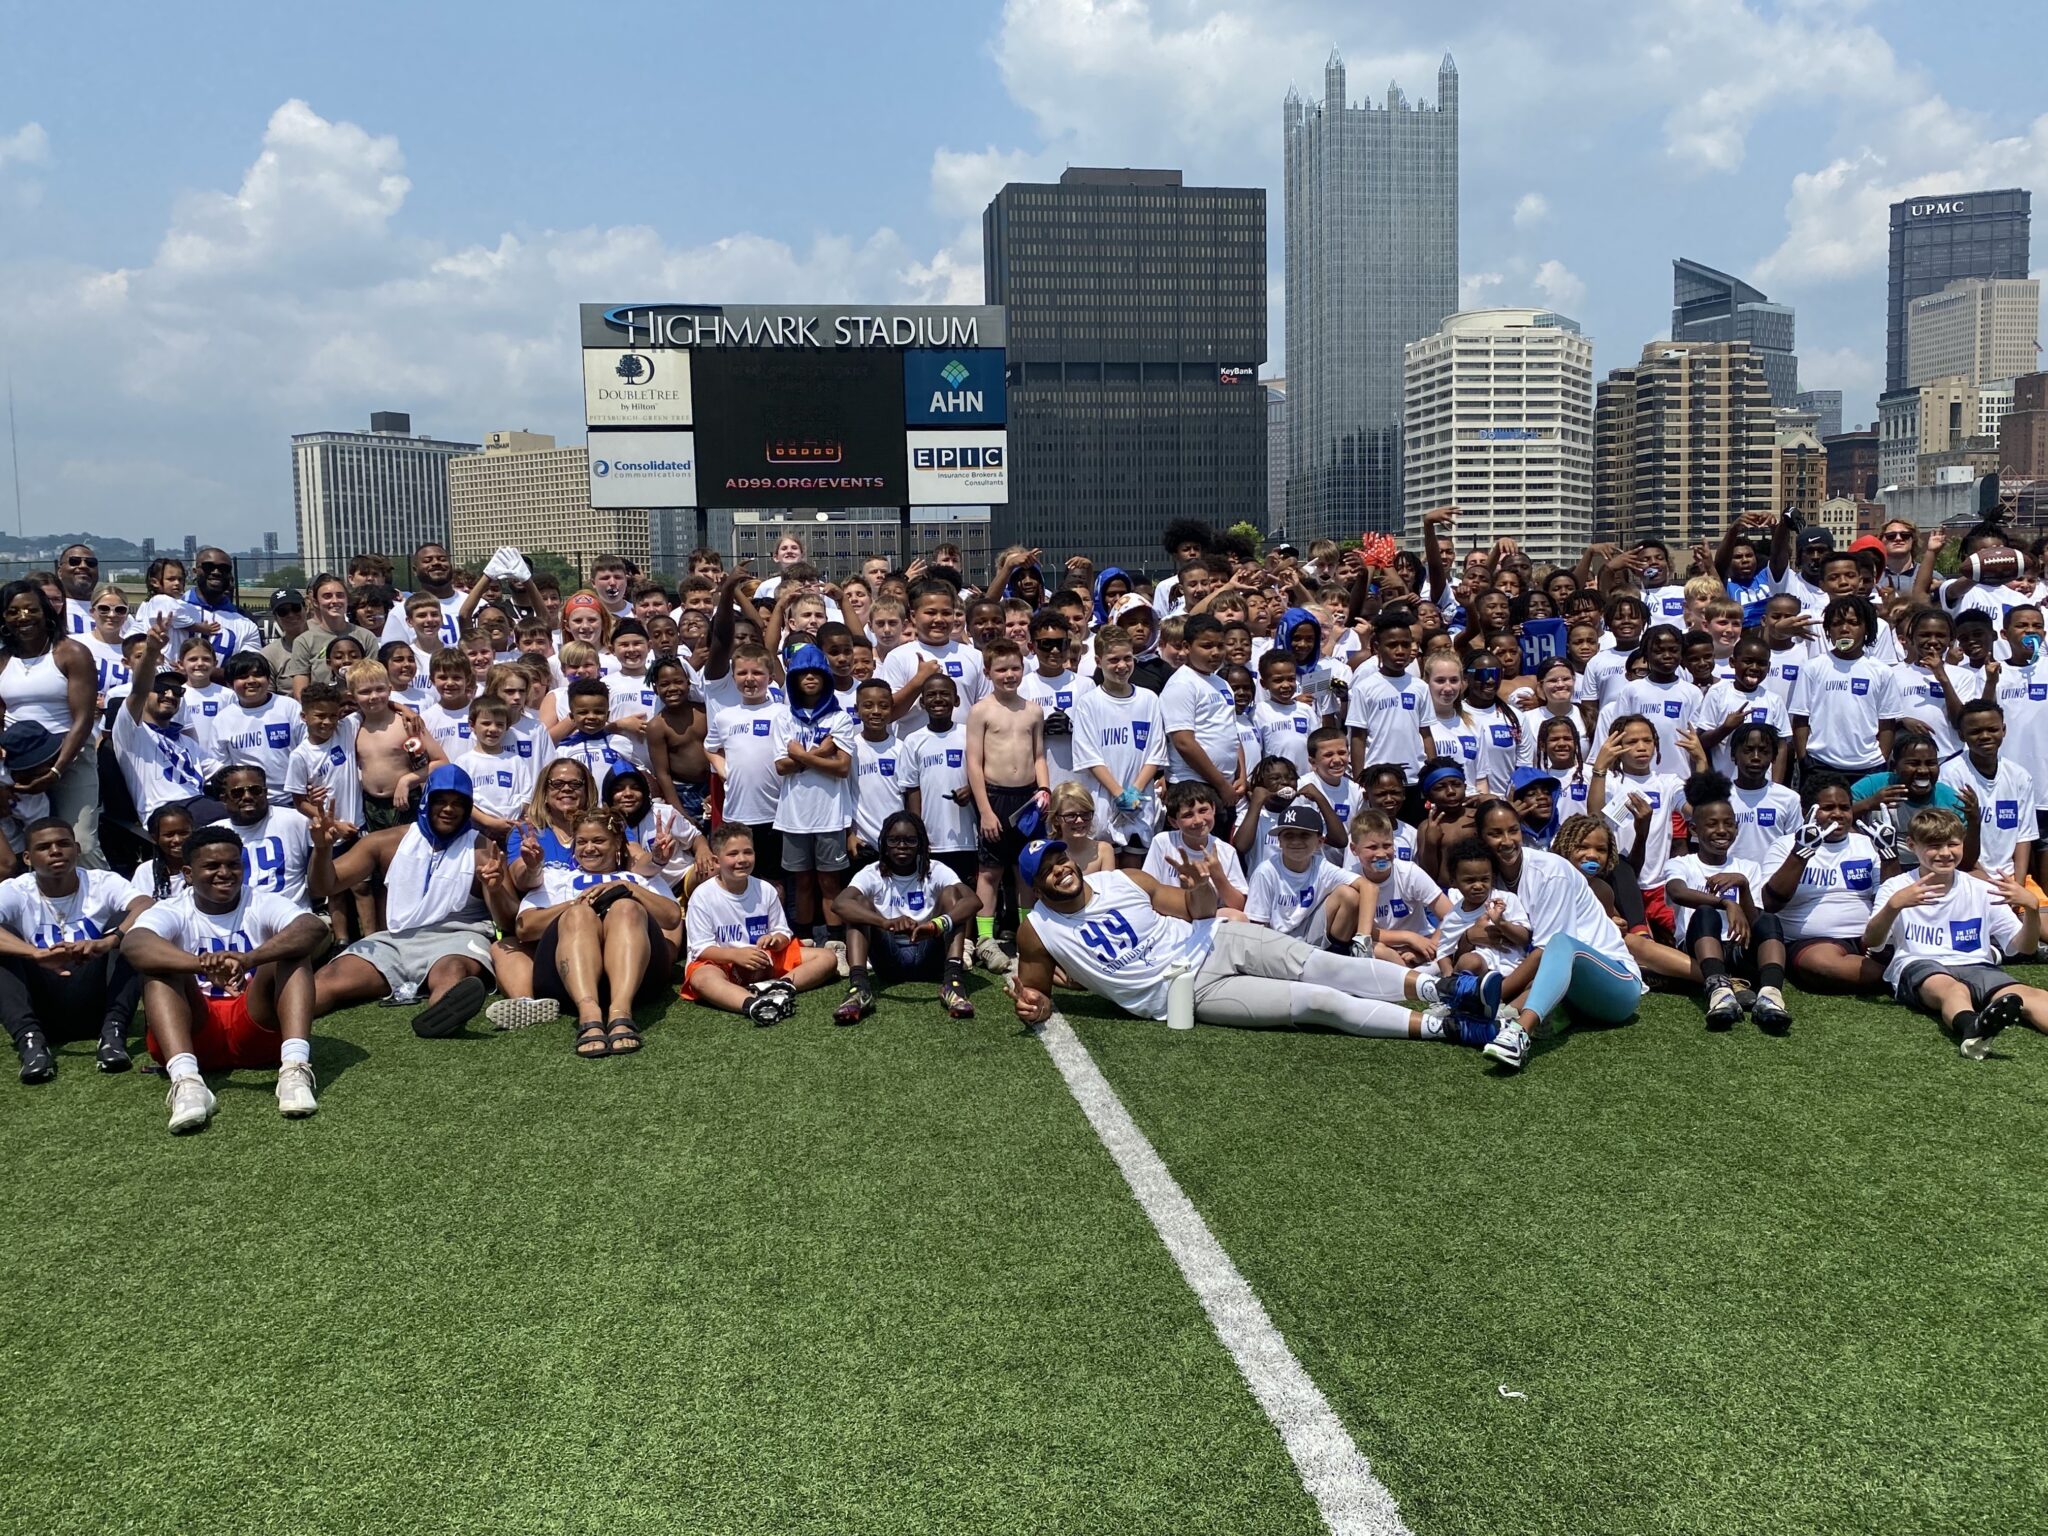 Pitt legend and Los Angeles Rams defensive lineman Aaron Donald hosted his fourth annual Living in the Pocket Skills Camp